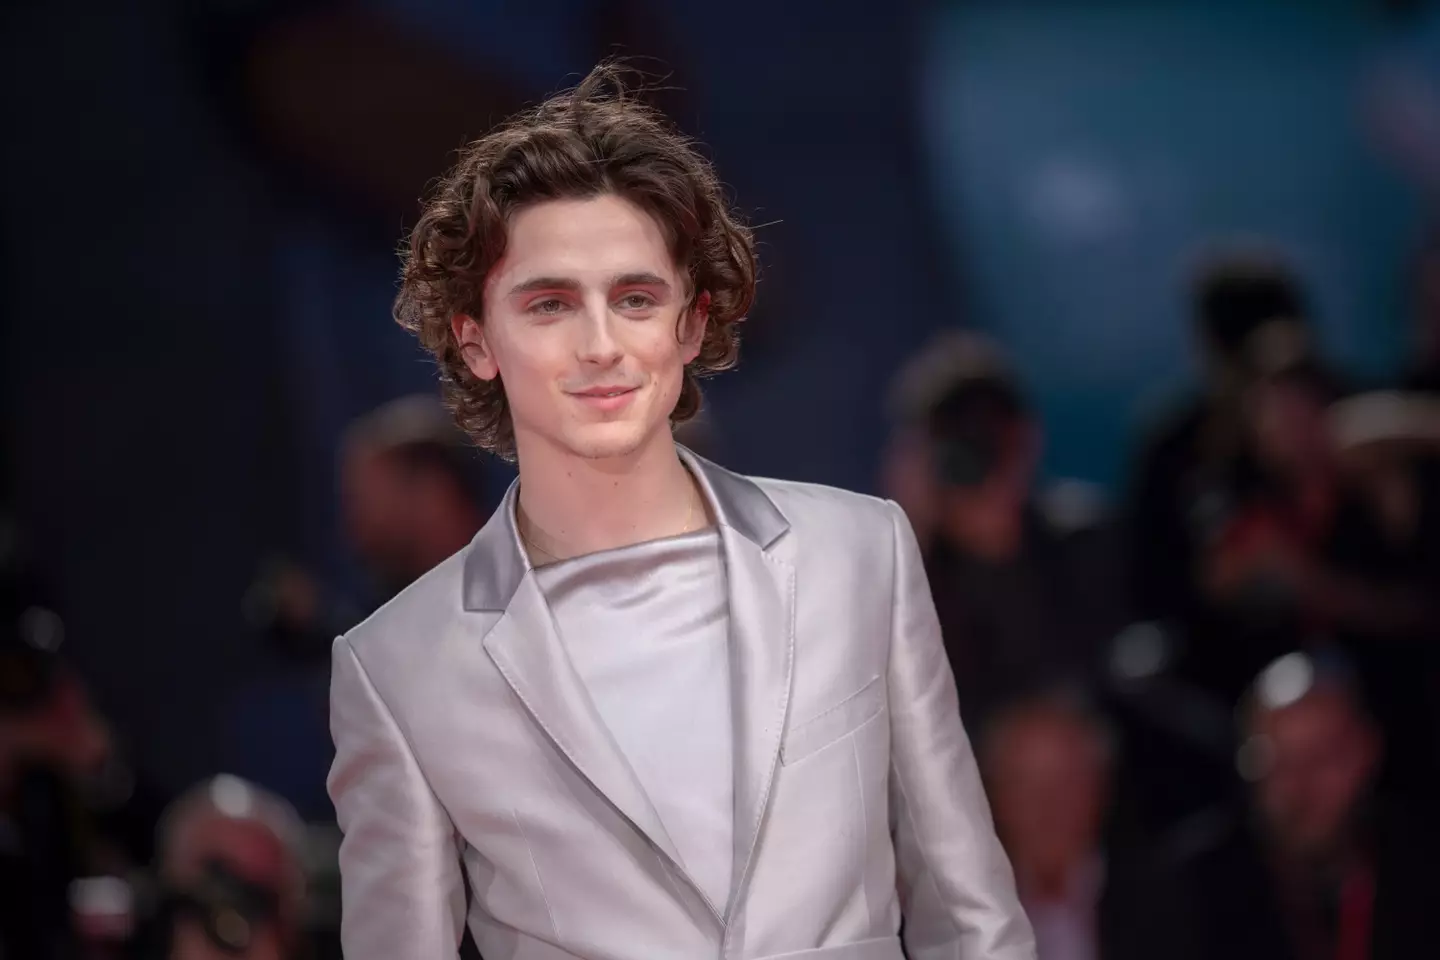 Timothee Chalamet will play a young Willy Wonka in a 2023 film (